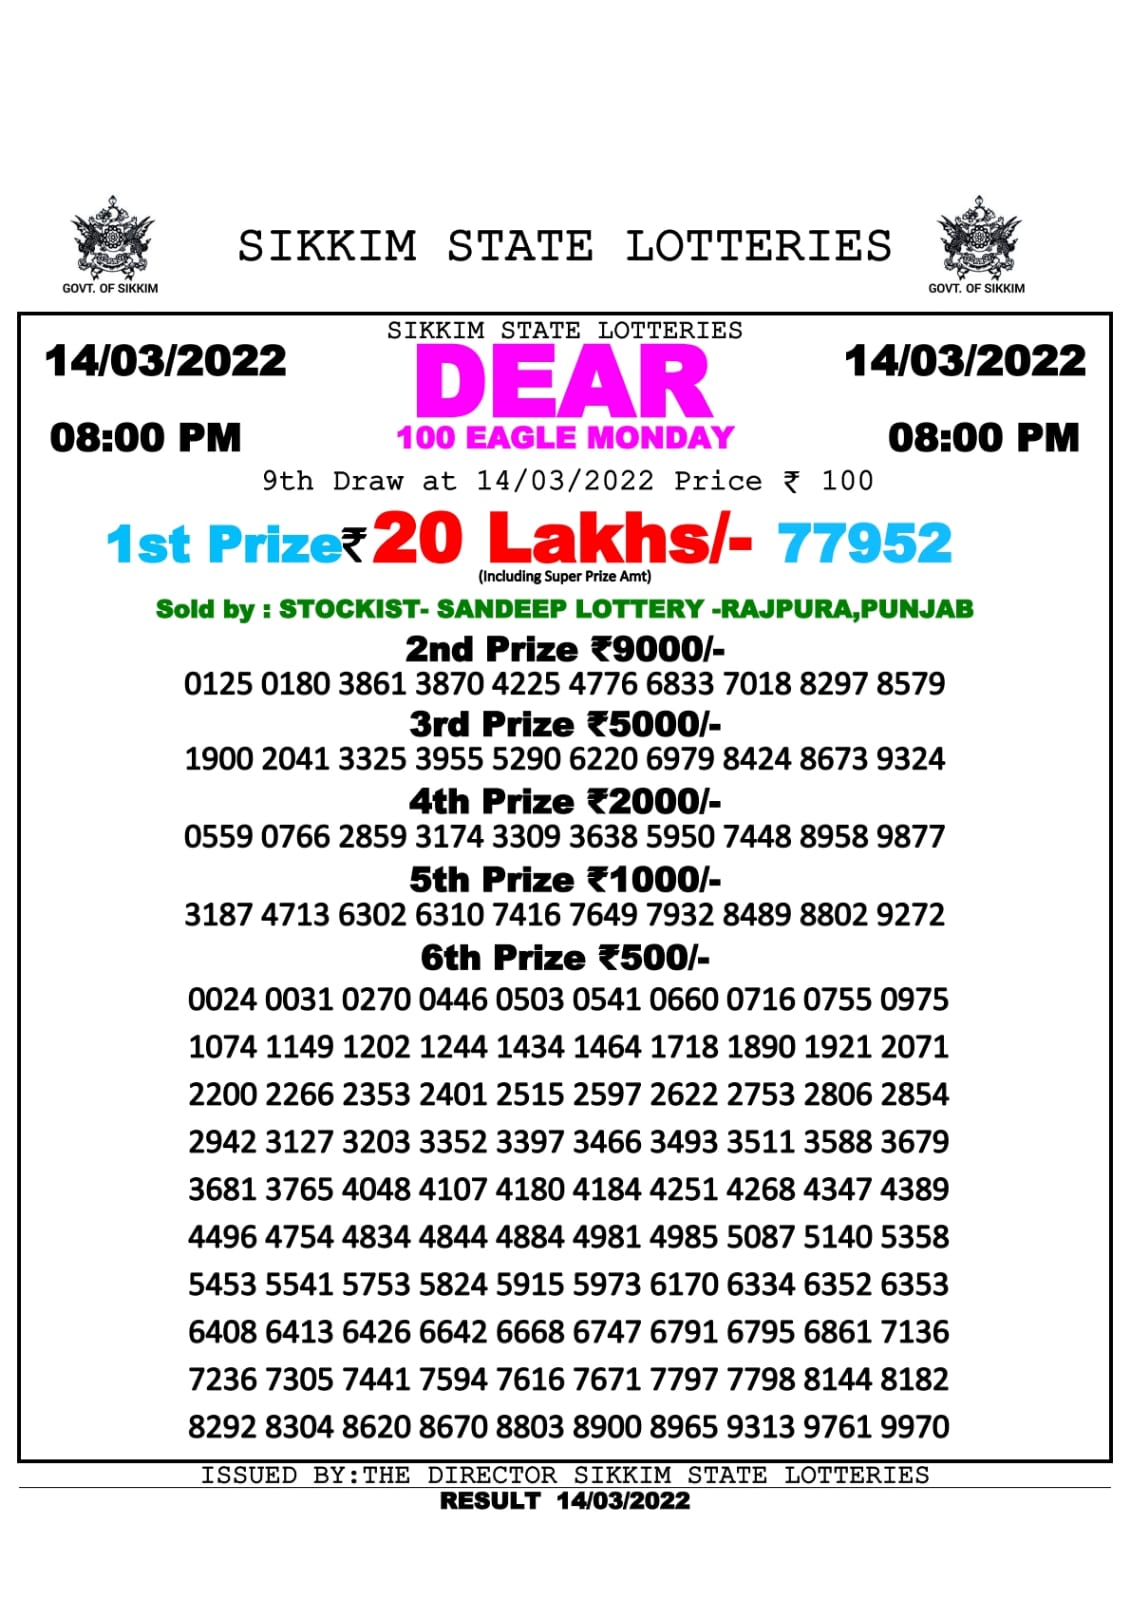 DEAR 100 WEEKLY RESULT 8.00PM 14.03.2022